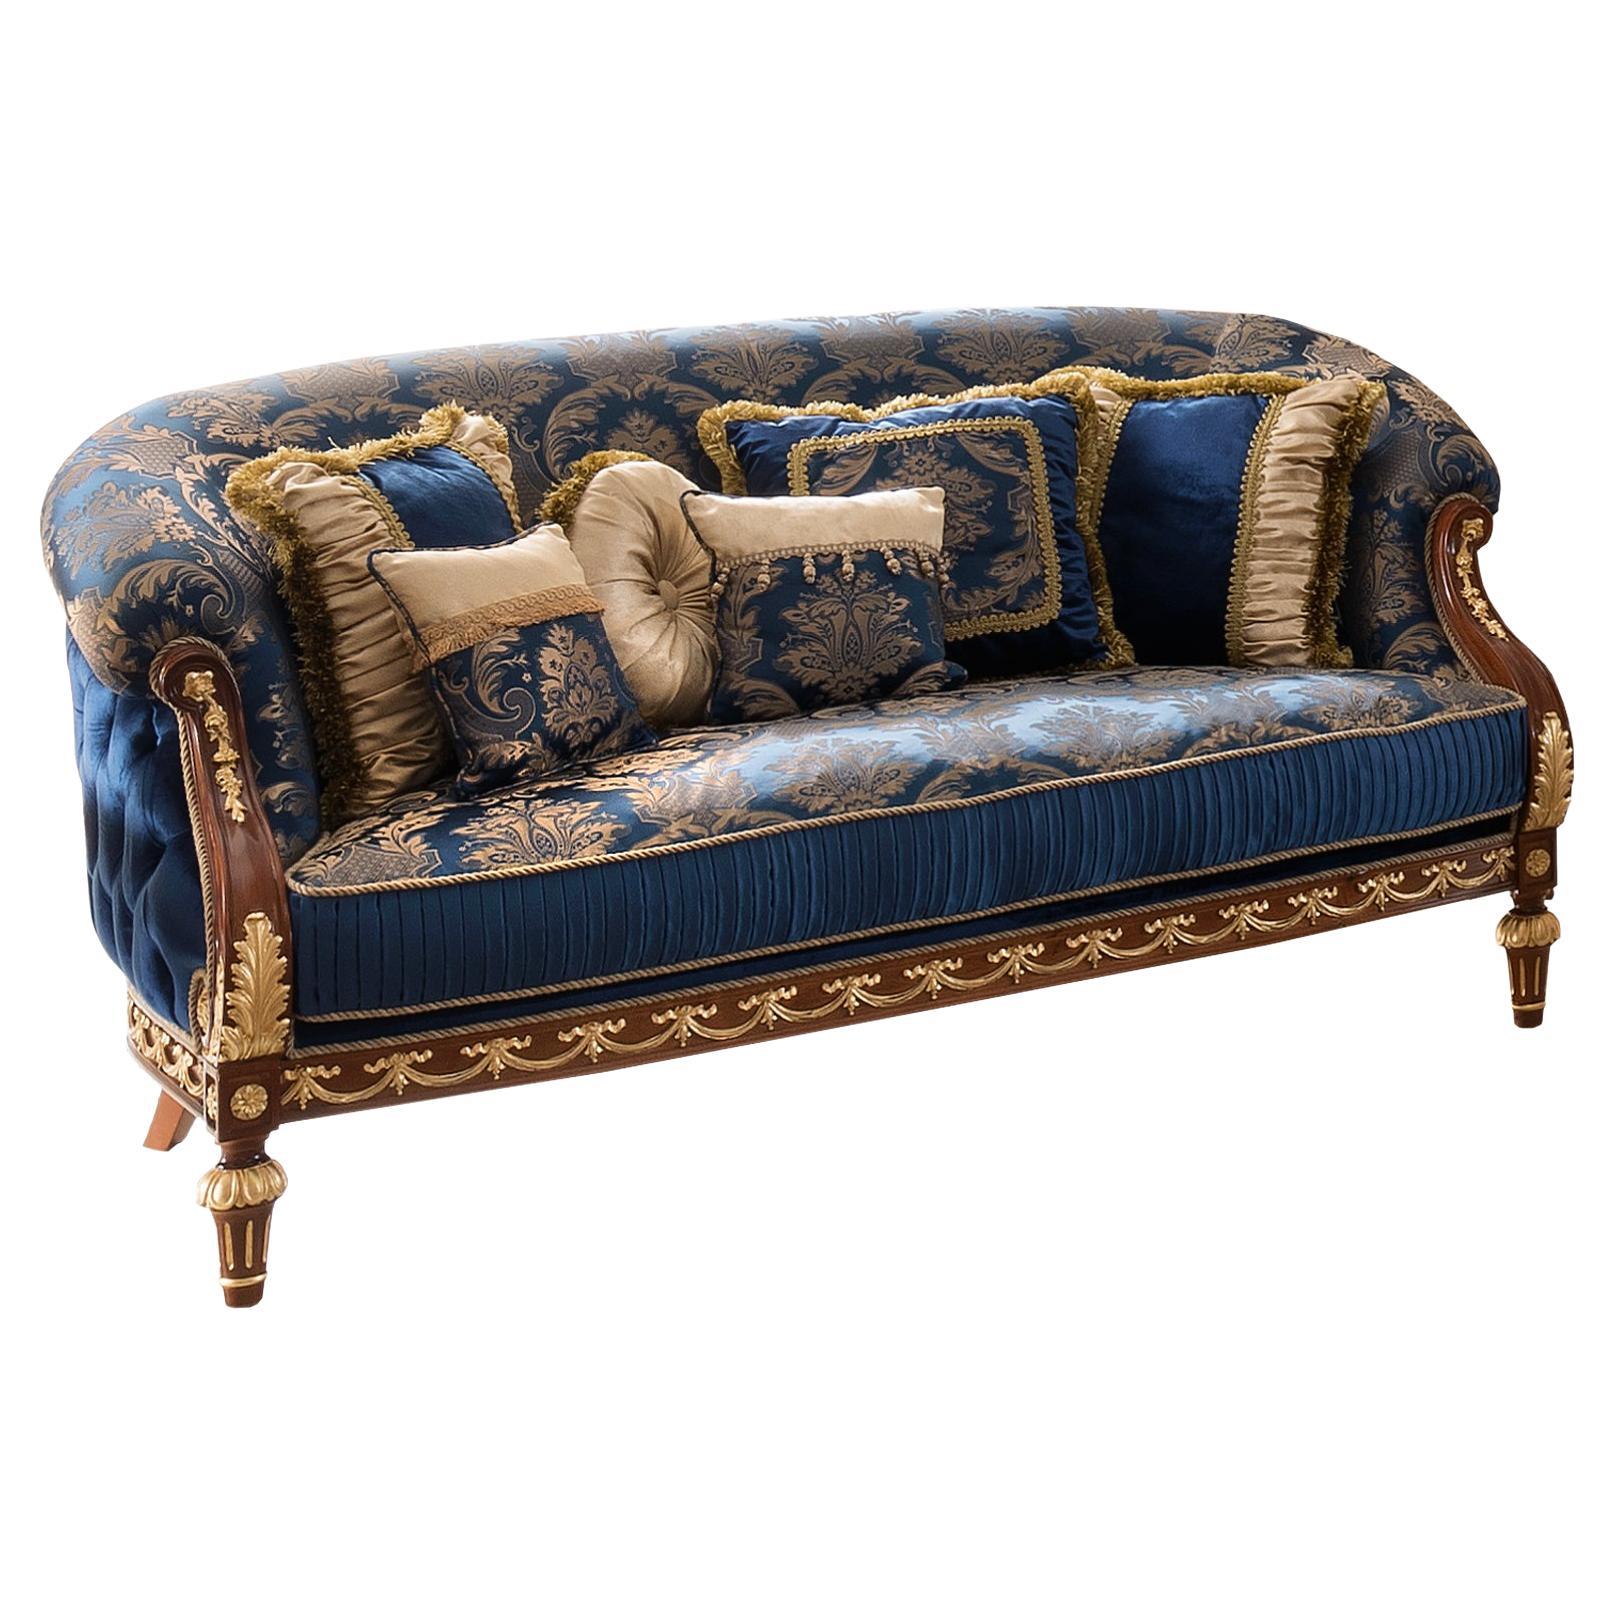 Blue Royal Palace Classic Sofa in Exclusive Cherry Wood and Gold Leaf Appliqué